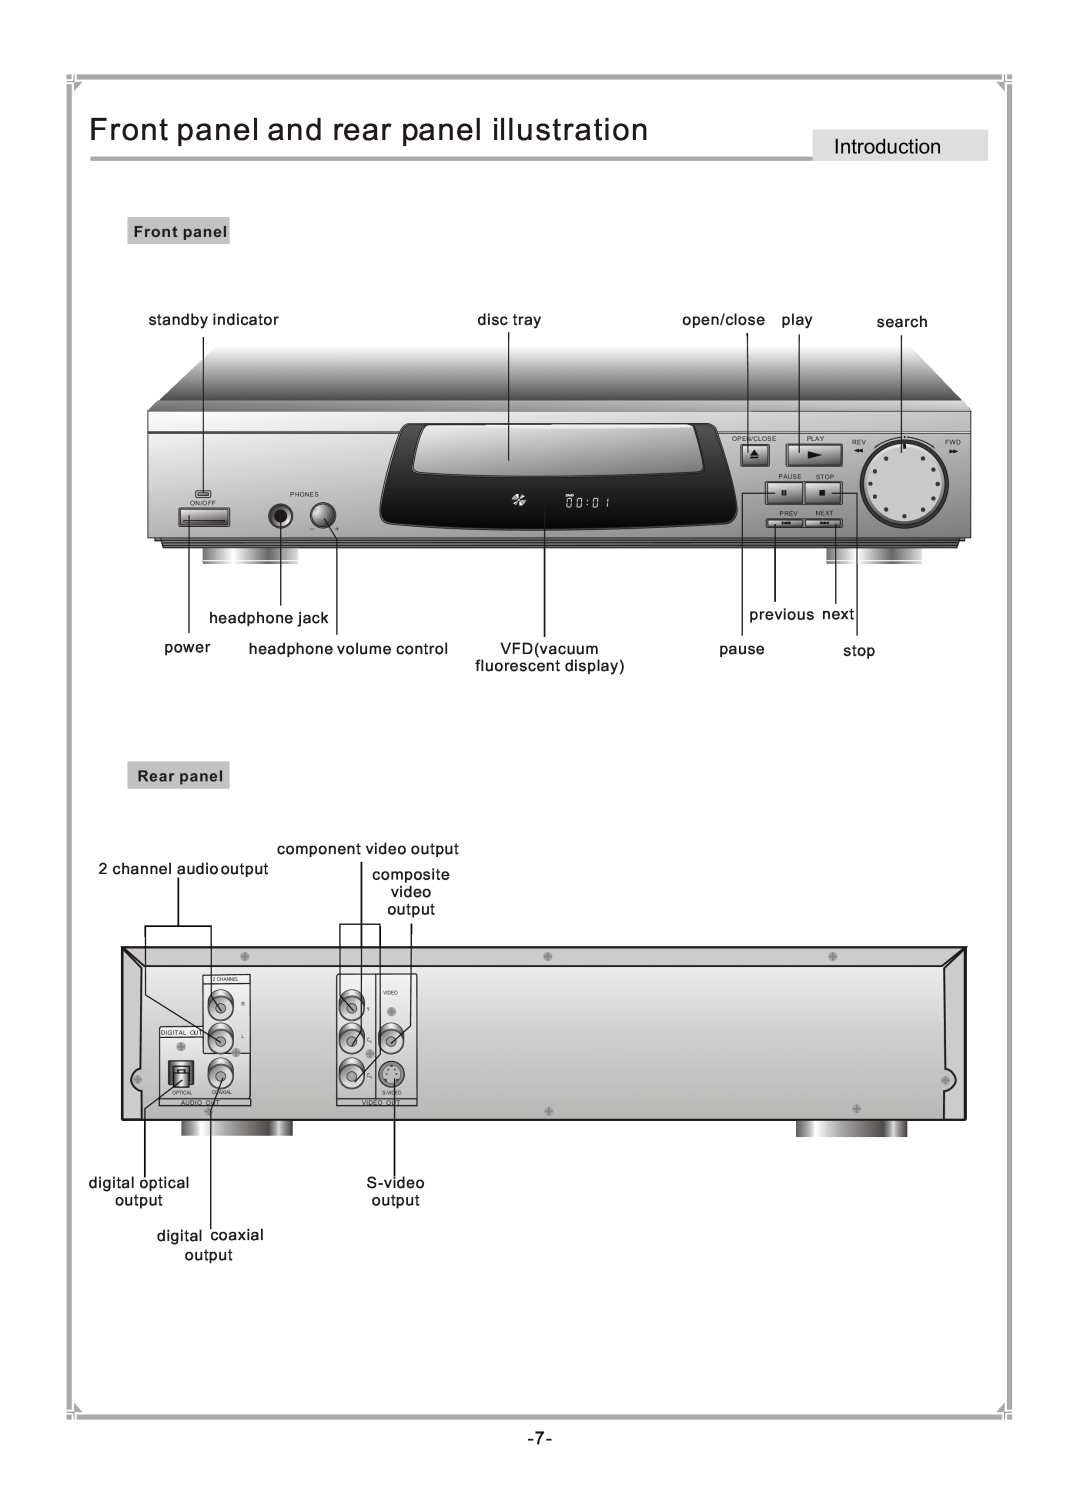 GoVideo DVP745 user manual Front panel and rear panel illustration, Introduction 